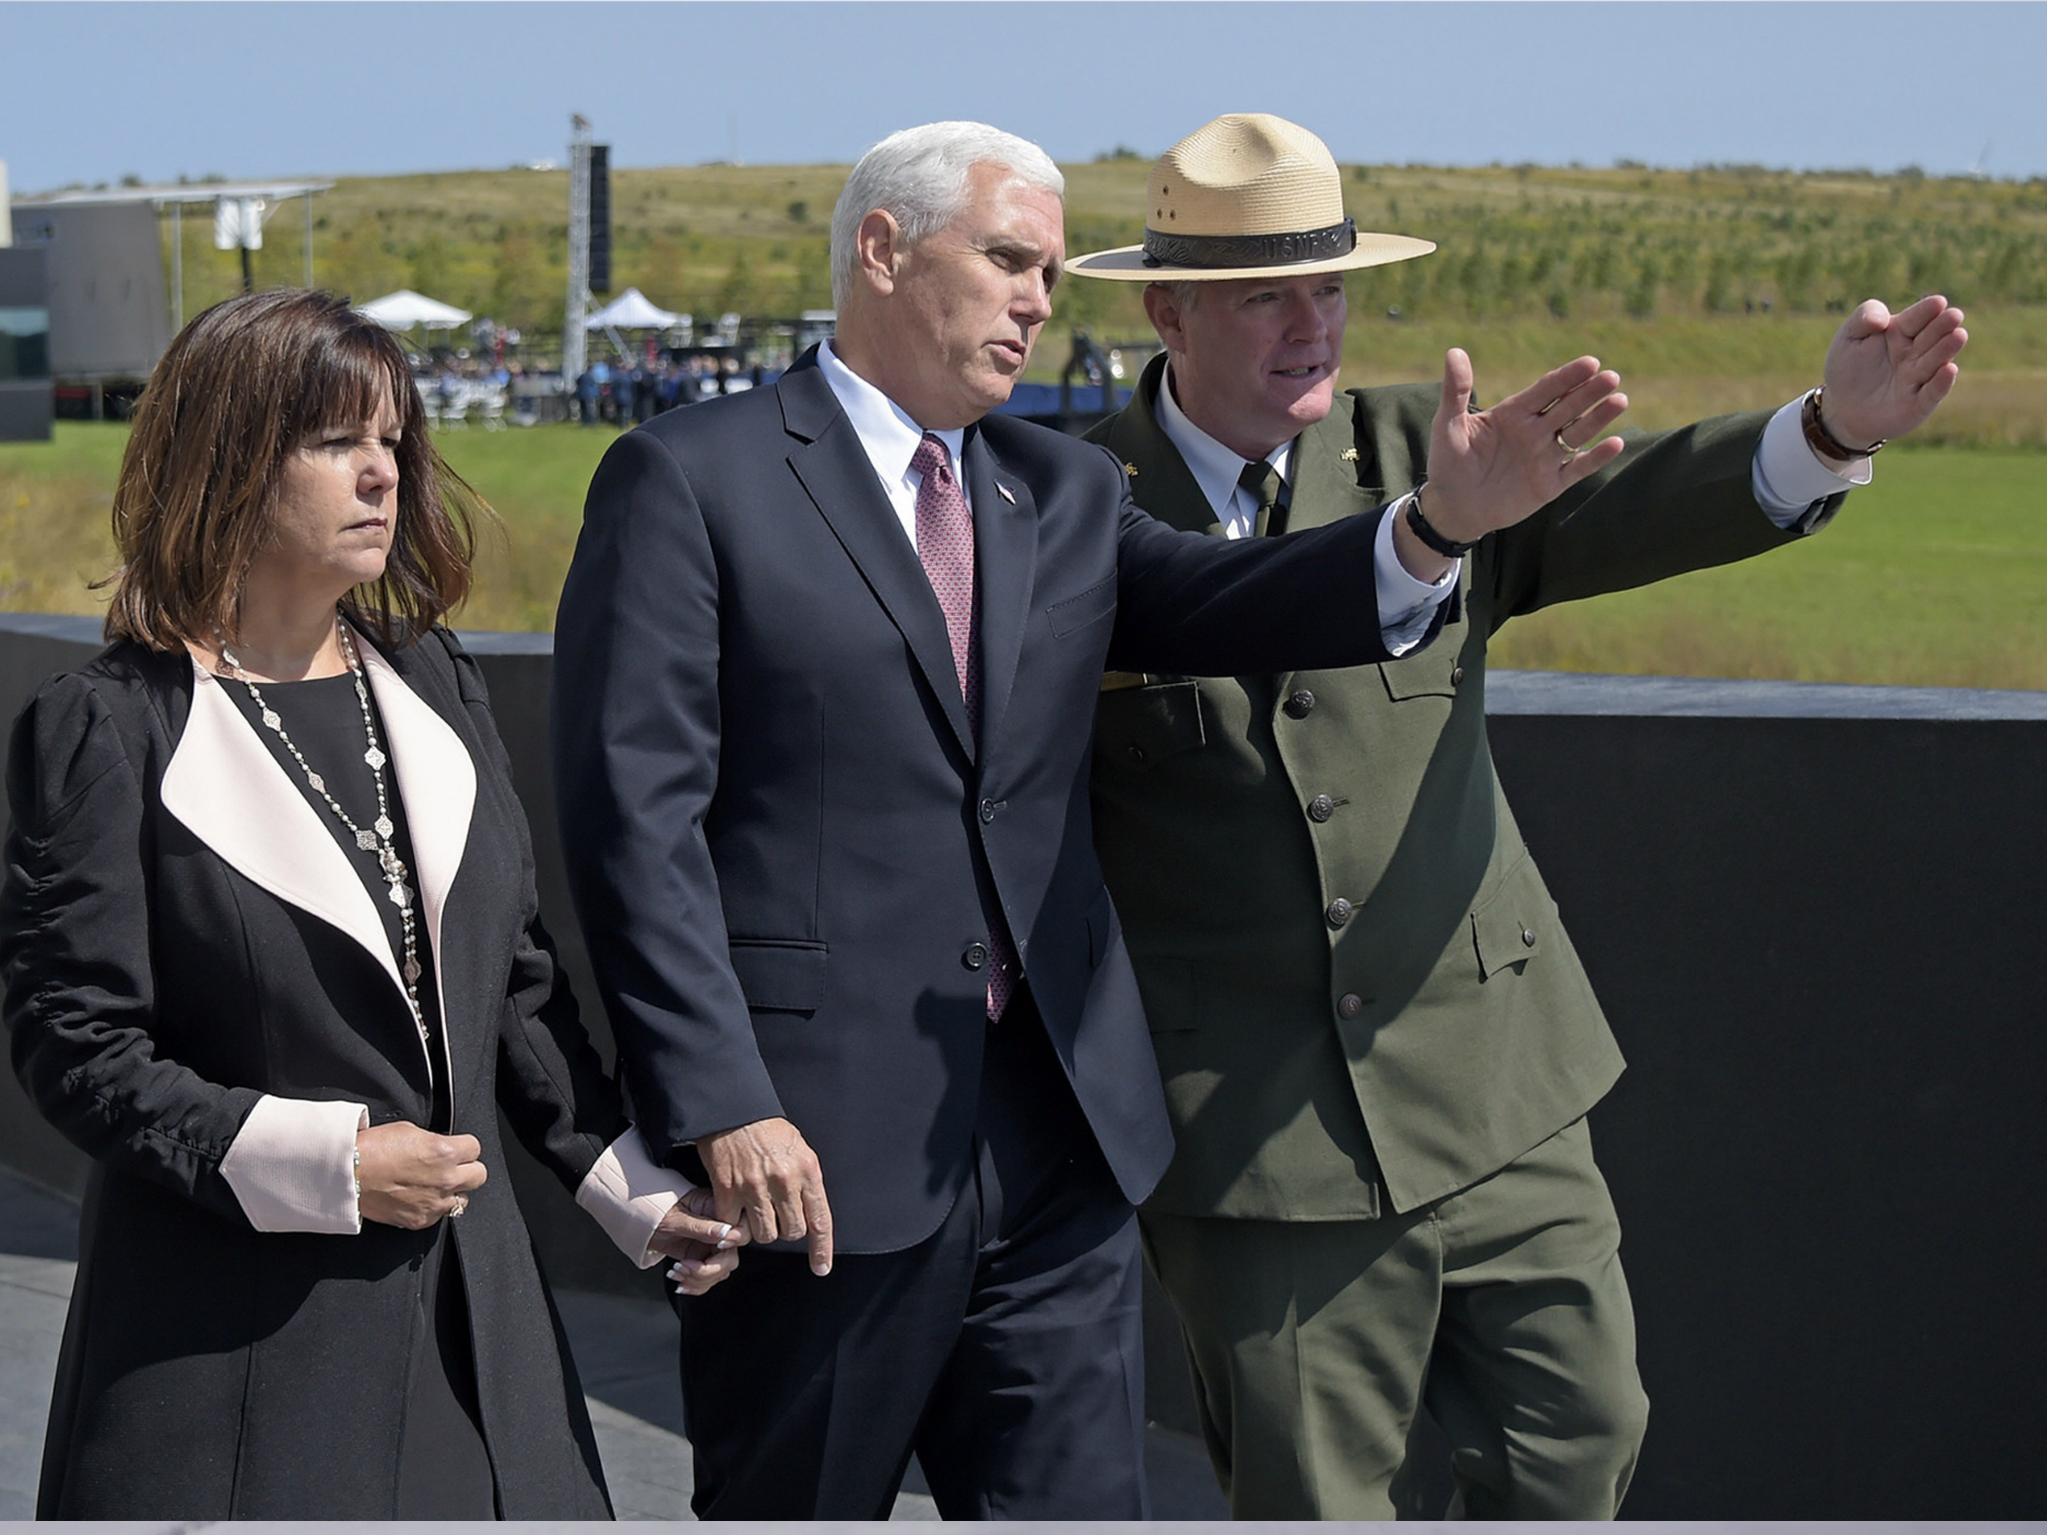 Stephen M. Clark, Superintendent of the Flight 93 Memorial, right, shows the flight path of United Flight 93 to Vice President Mike Pence and his wife Karen in Shanksville, Pennsylvania on 11 September 2017.